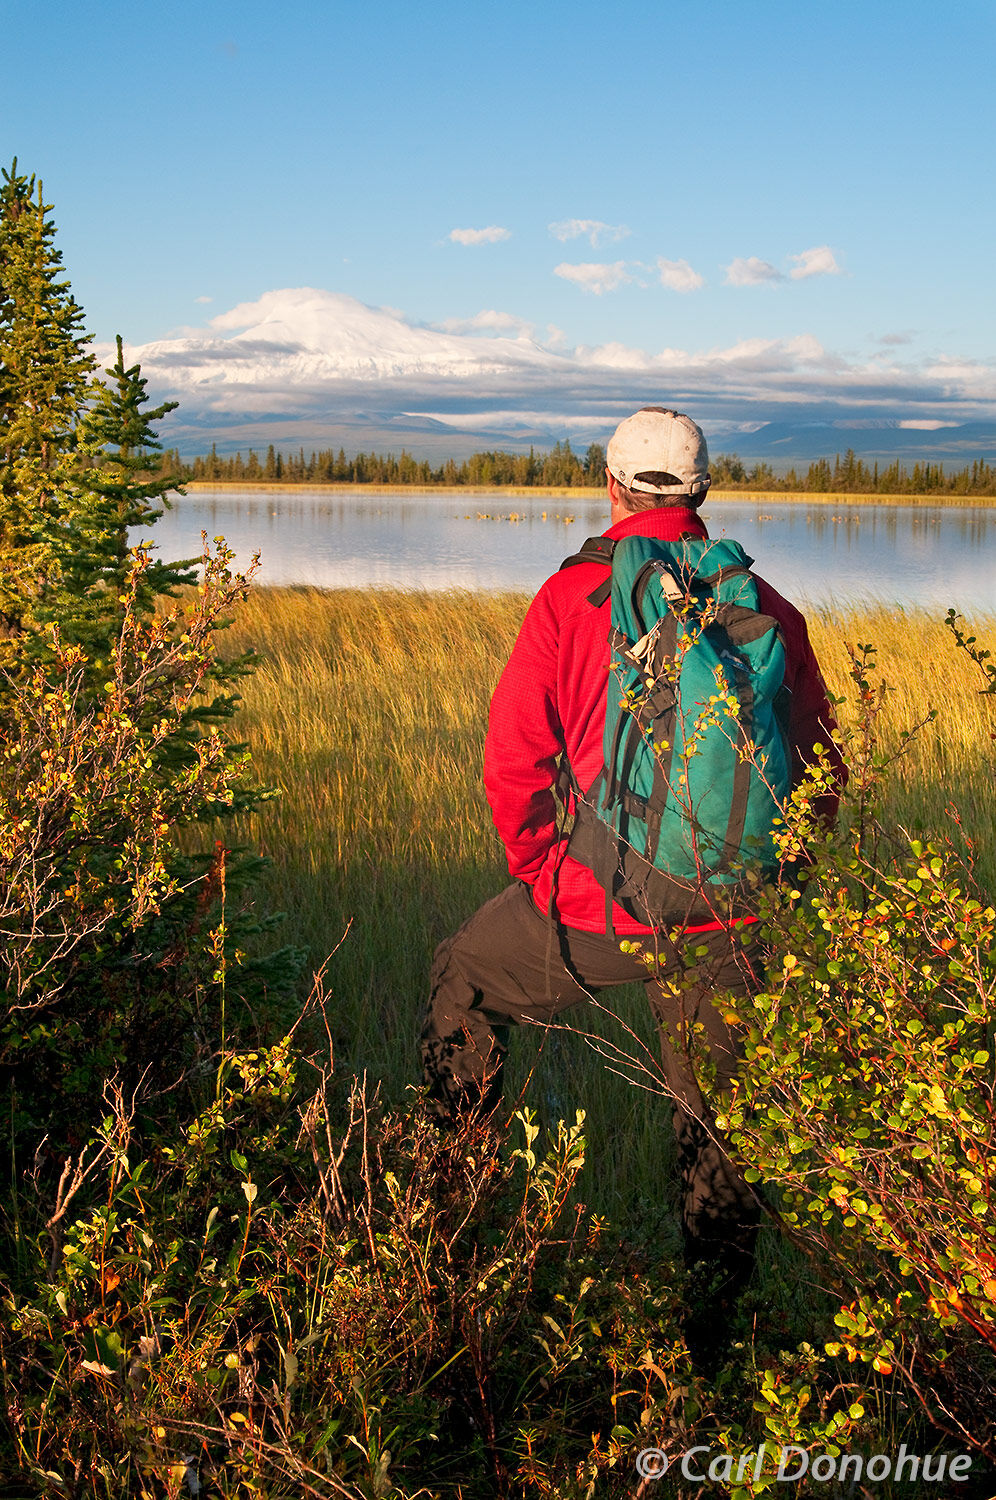 A hiker takes in the morning view of Mount Sanford. Looking across a kettle pond and boreal forest, a hiker pauses to view Mt...